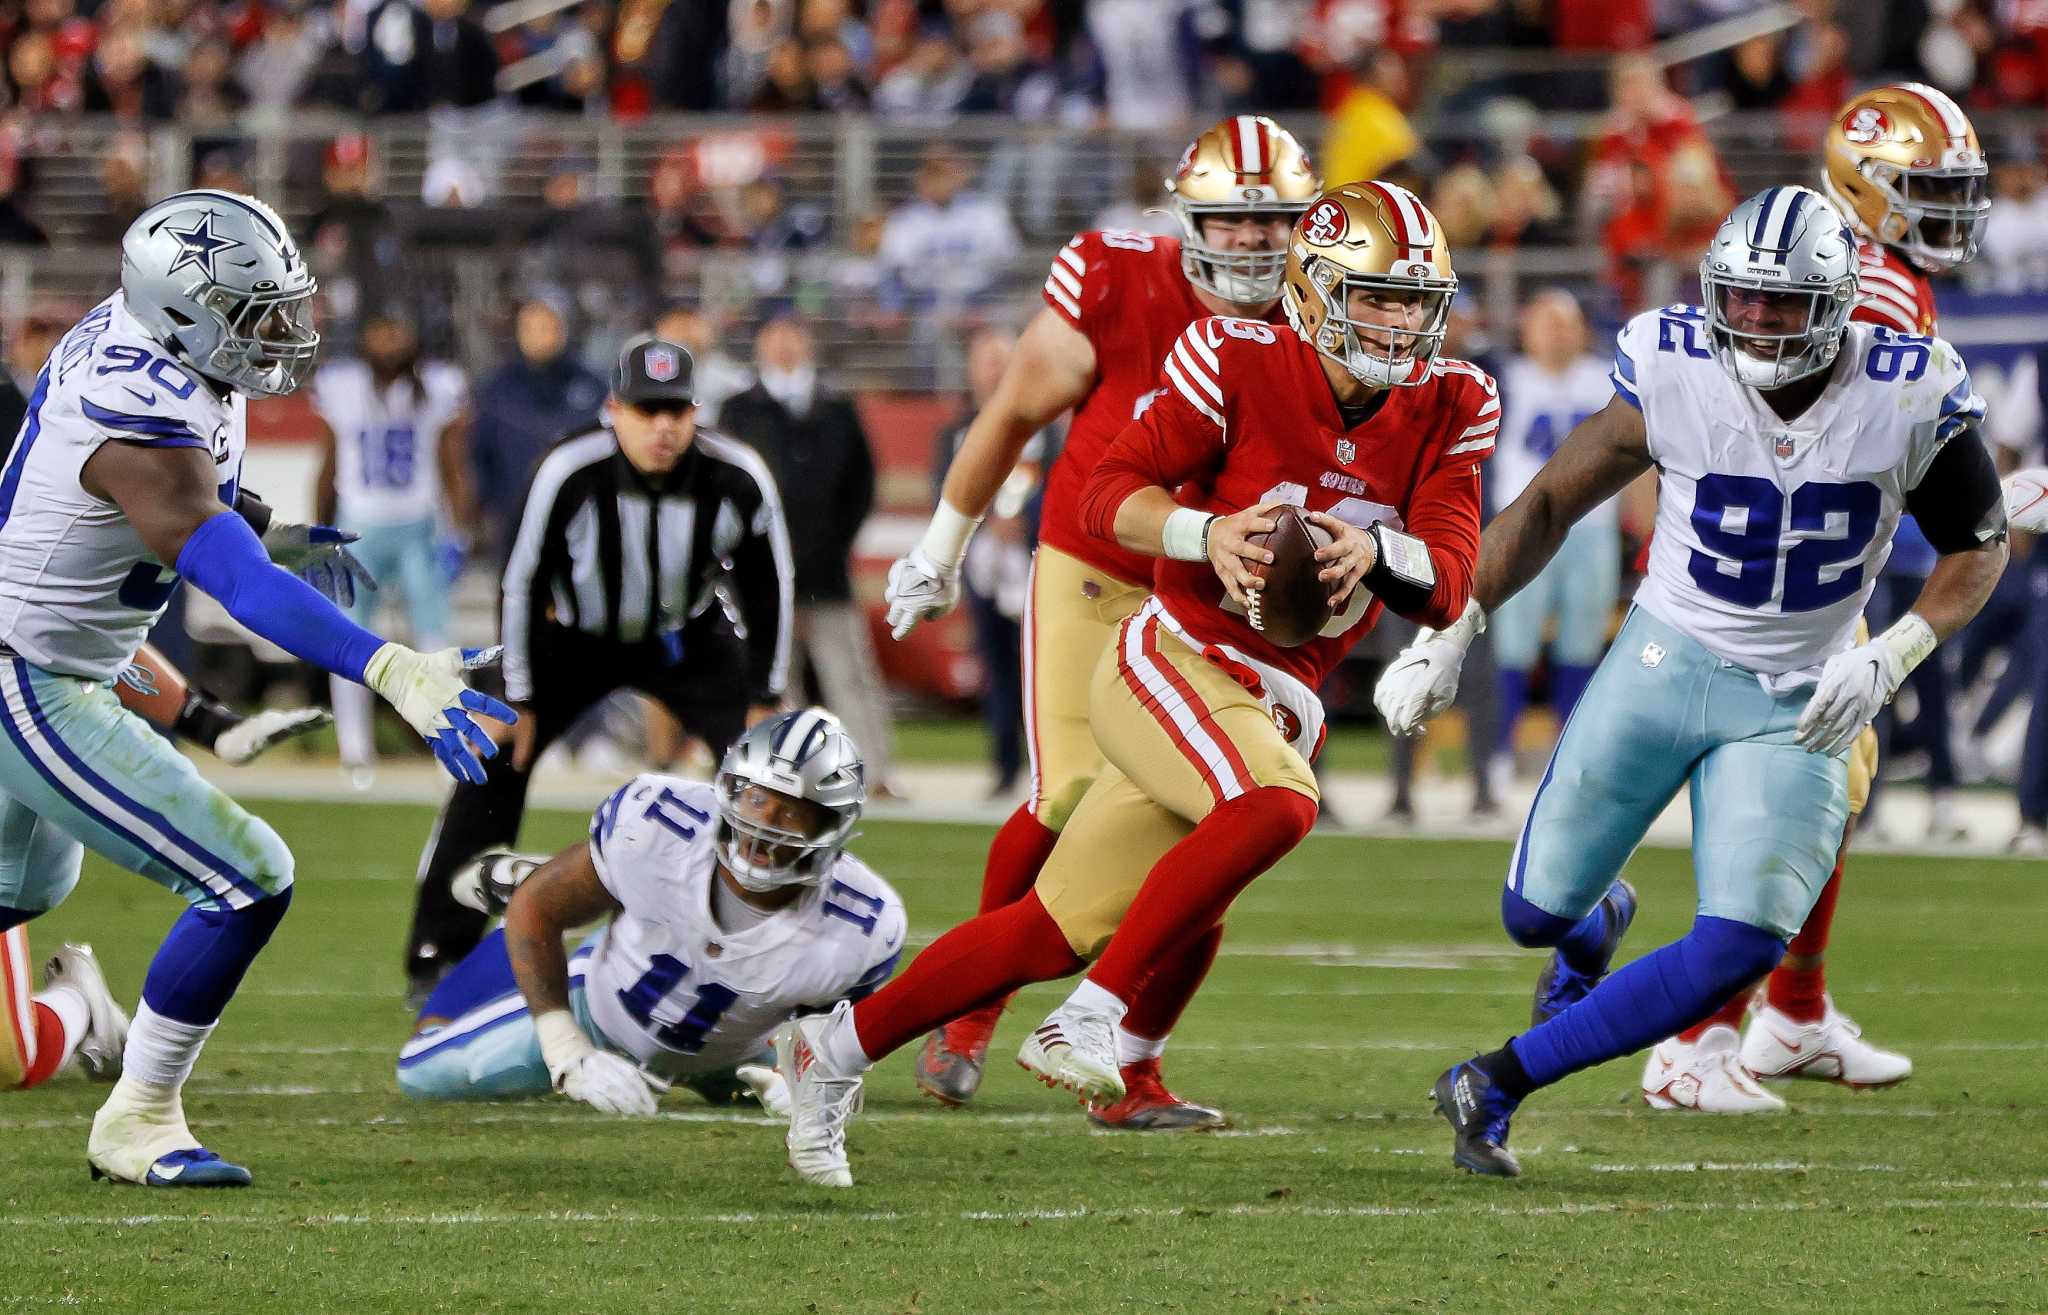 Cowboys-49ers rivalry set for record-tying ninth playoff game